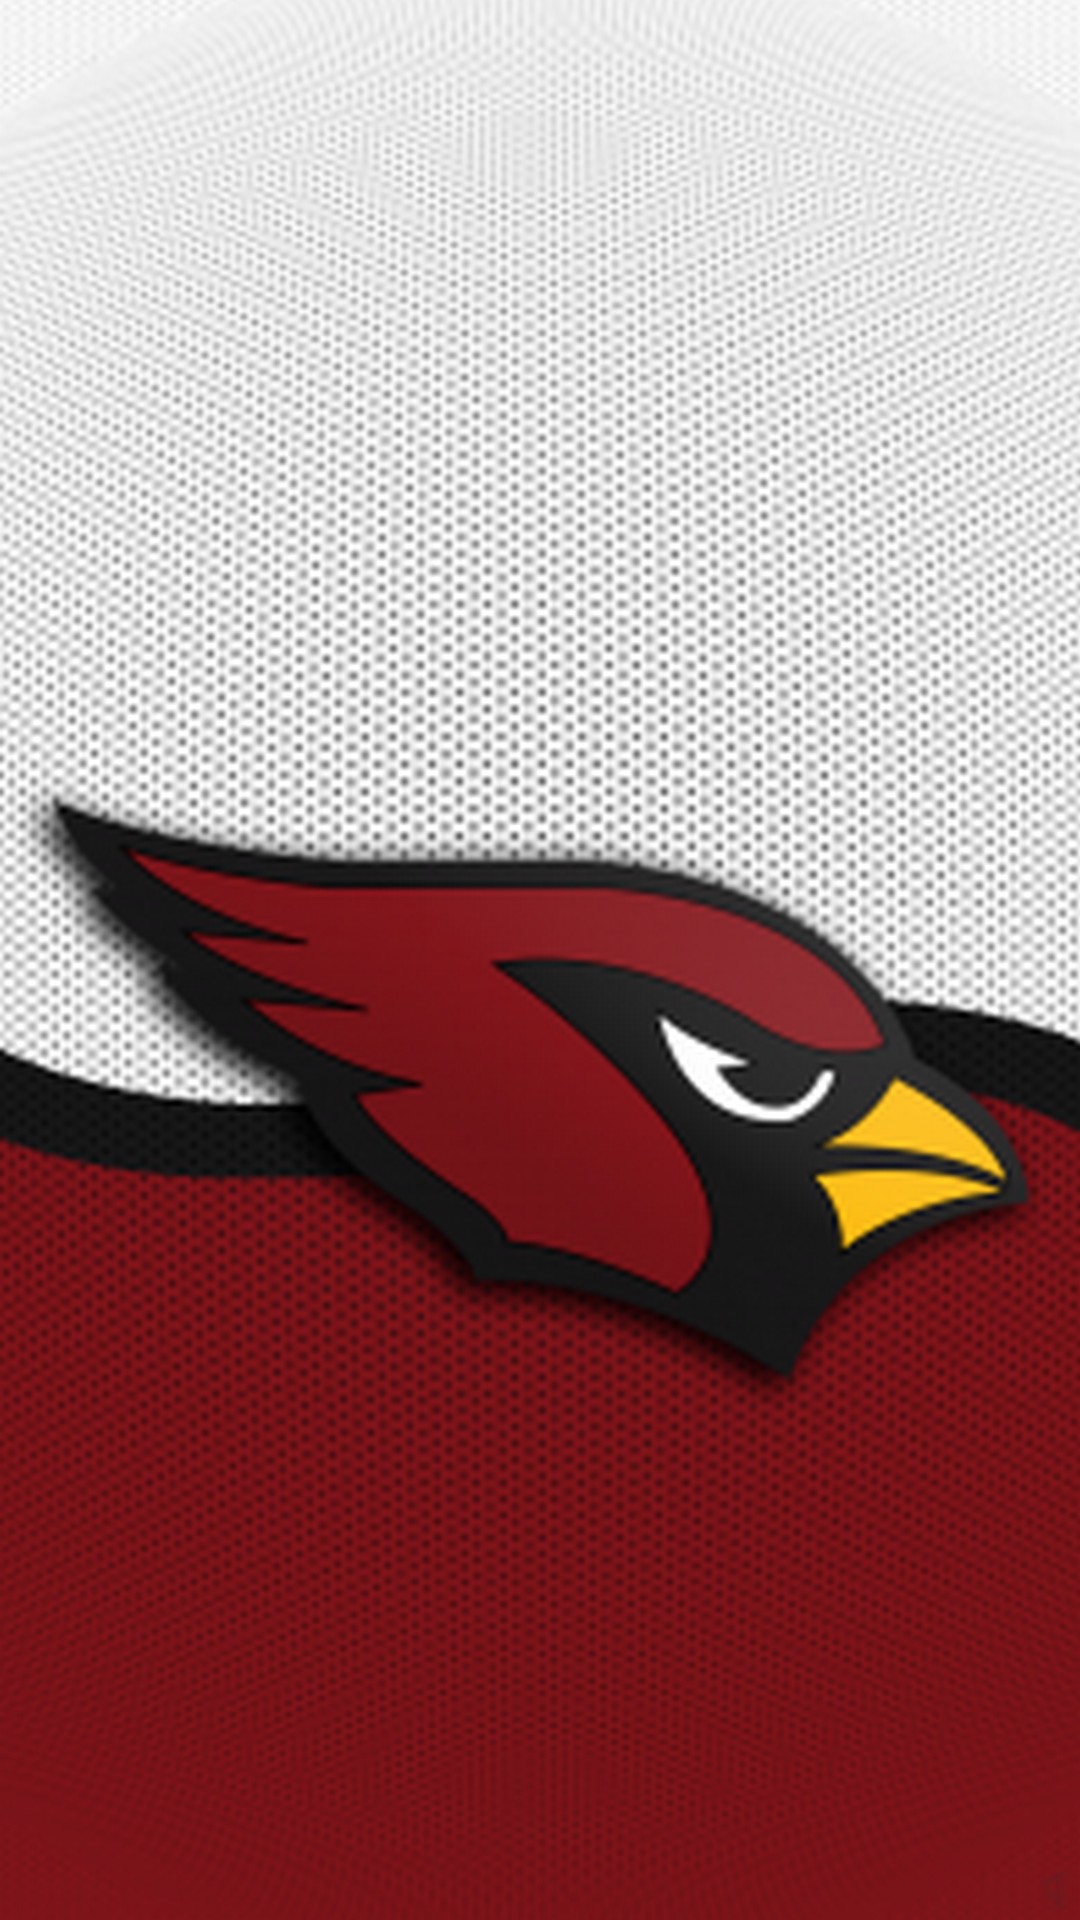 Arizona Cardinals iPhone Home Screen Wallpaper With high-resolution 1080X1920 pixel. Download and set as wallpaper for Apple iPhone X, XS Max, XR, 8, 7, 6, SE, iPad, Android